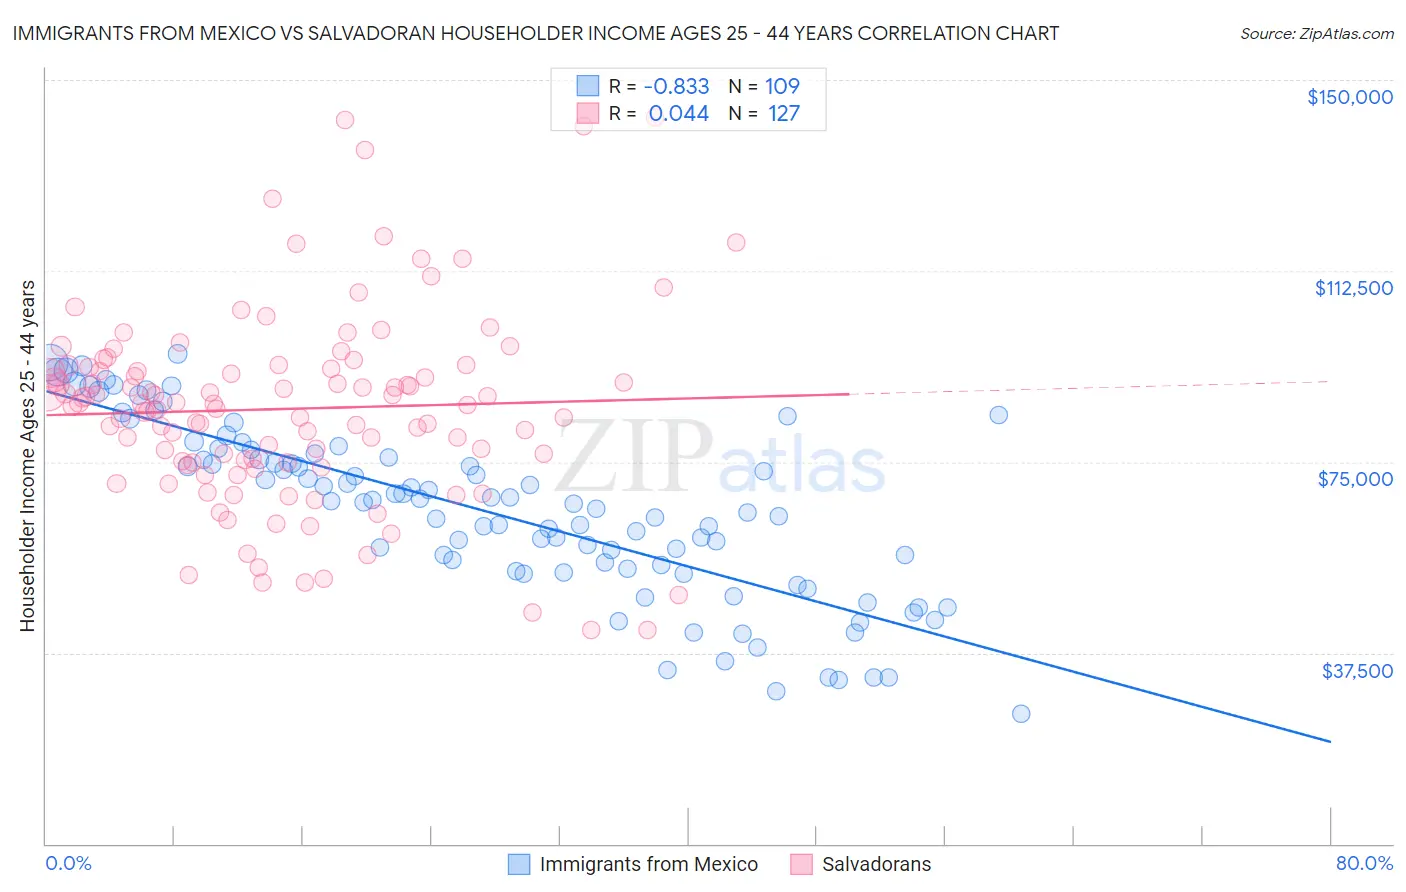 Immigrants from Mexico vs Salvadoran Householder Income Ages 25 - 44 years